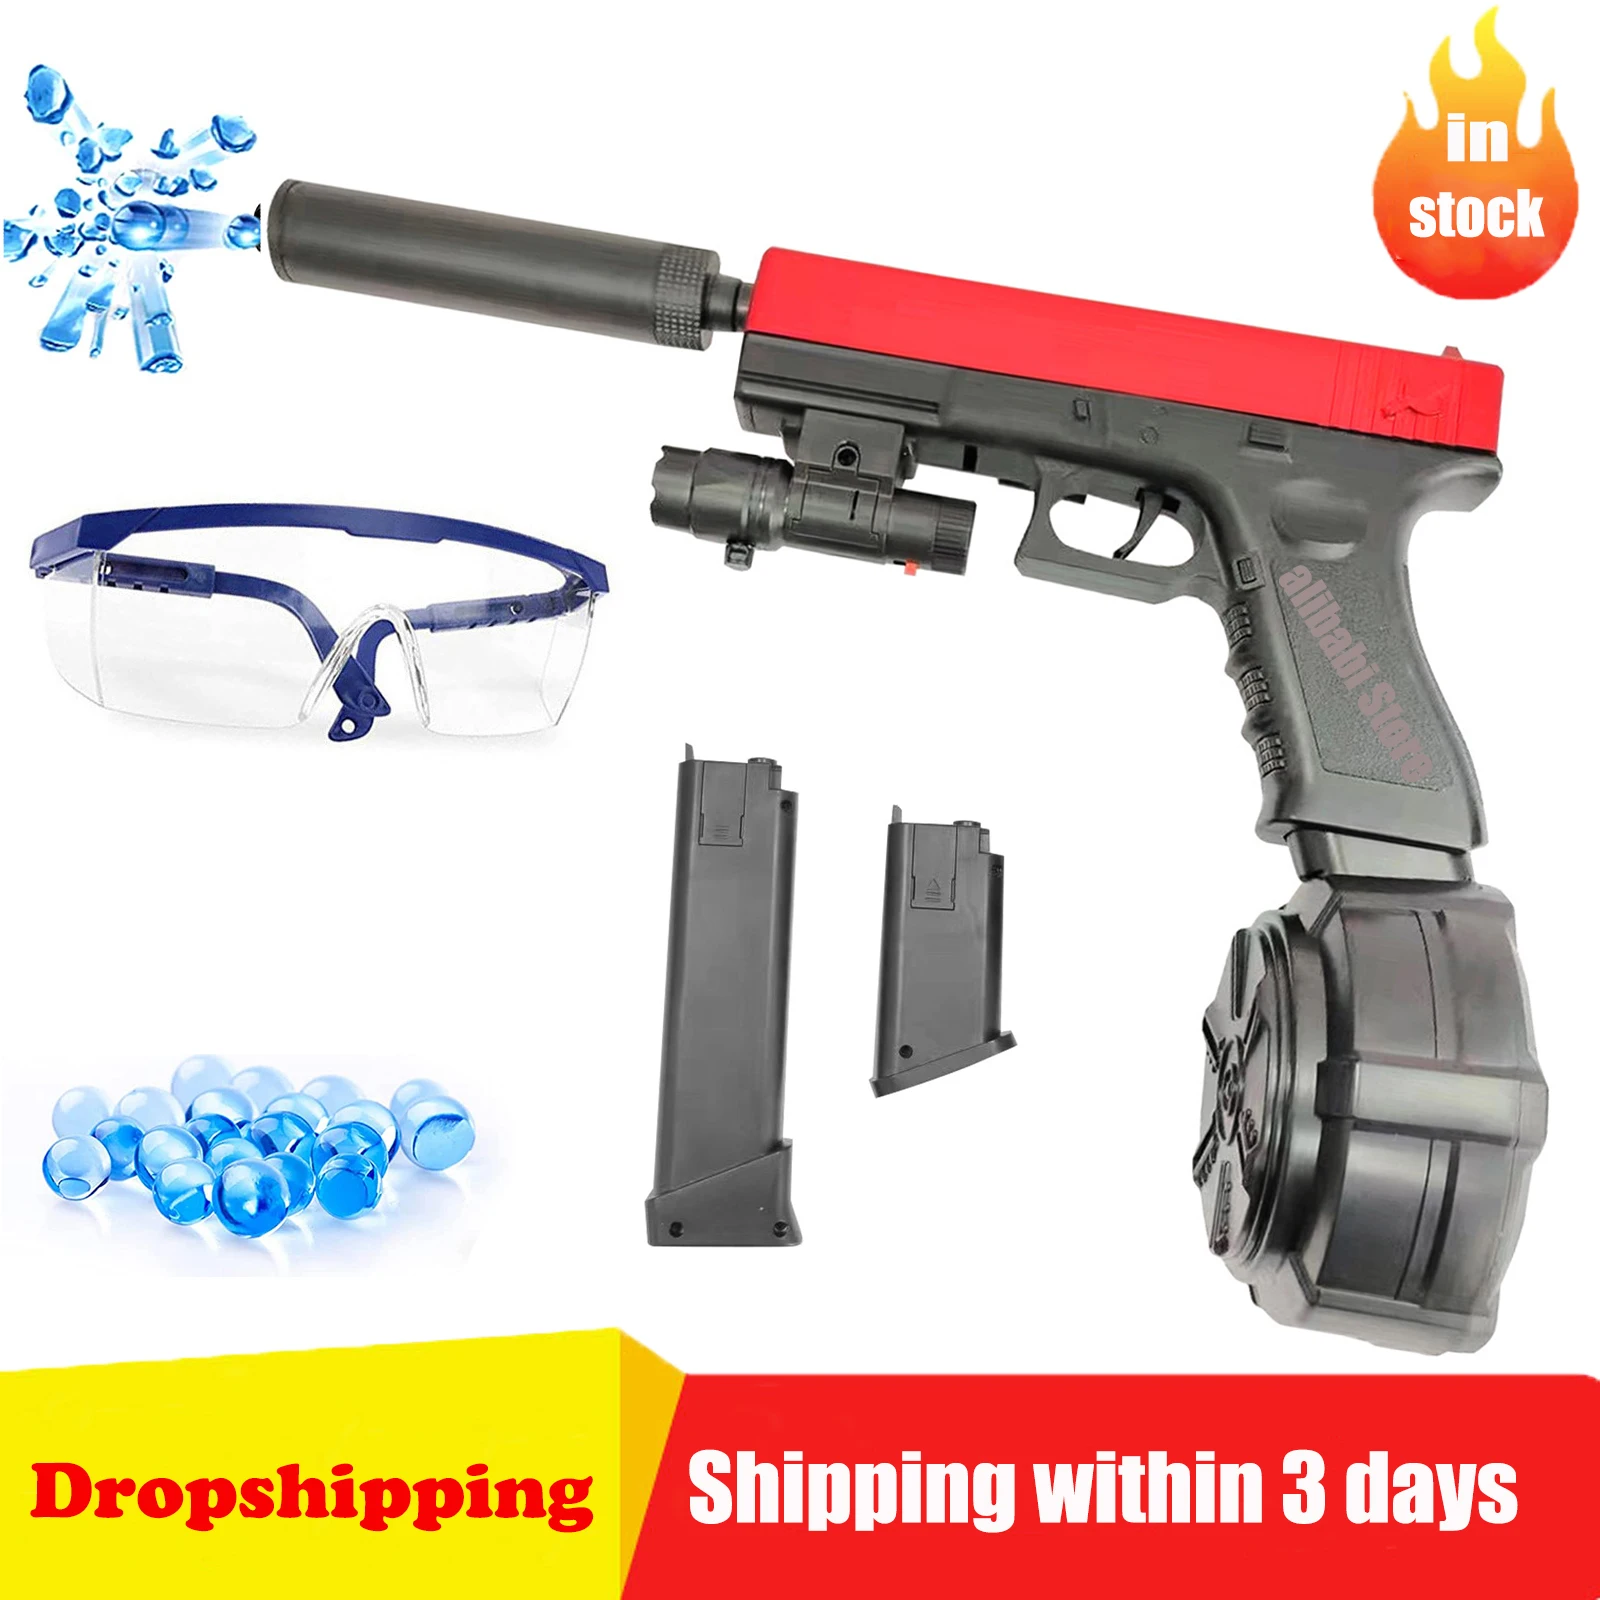 

JM X2 Glock Electric Splatter Ball Blaster Toys Gun Full Auto Gel Ball Blaster With 10000 Water Bombs For Kids Adult Outdoor Toy